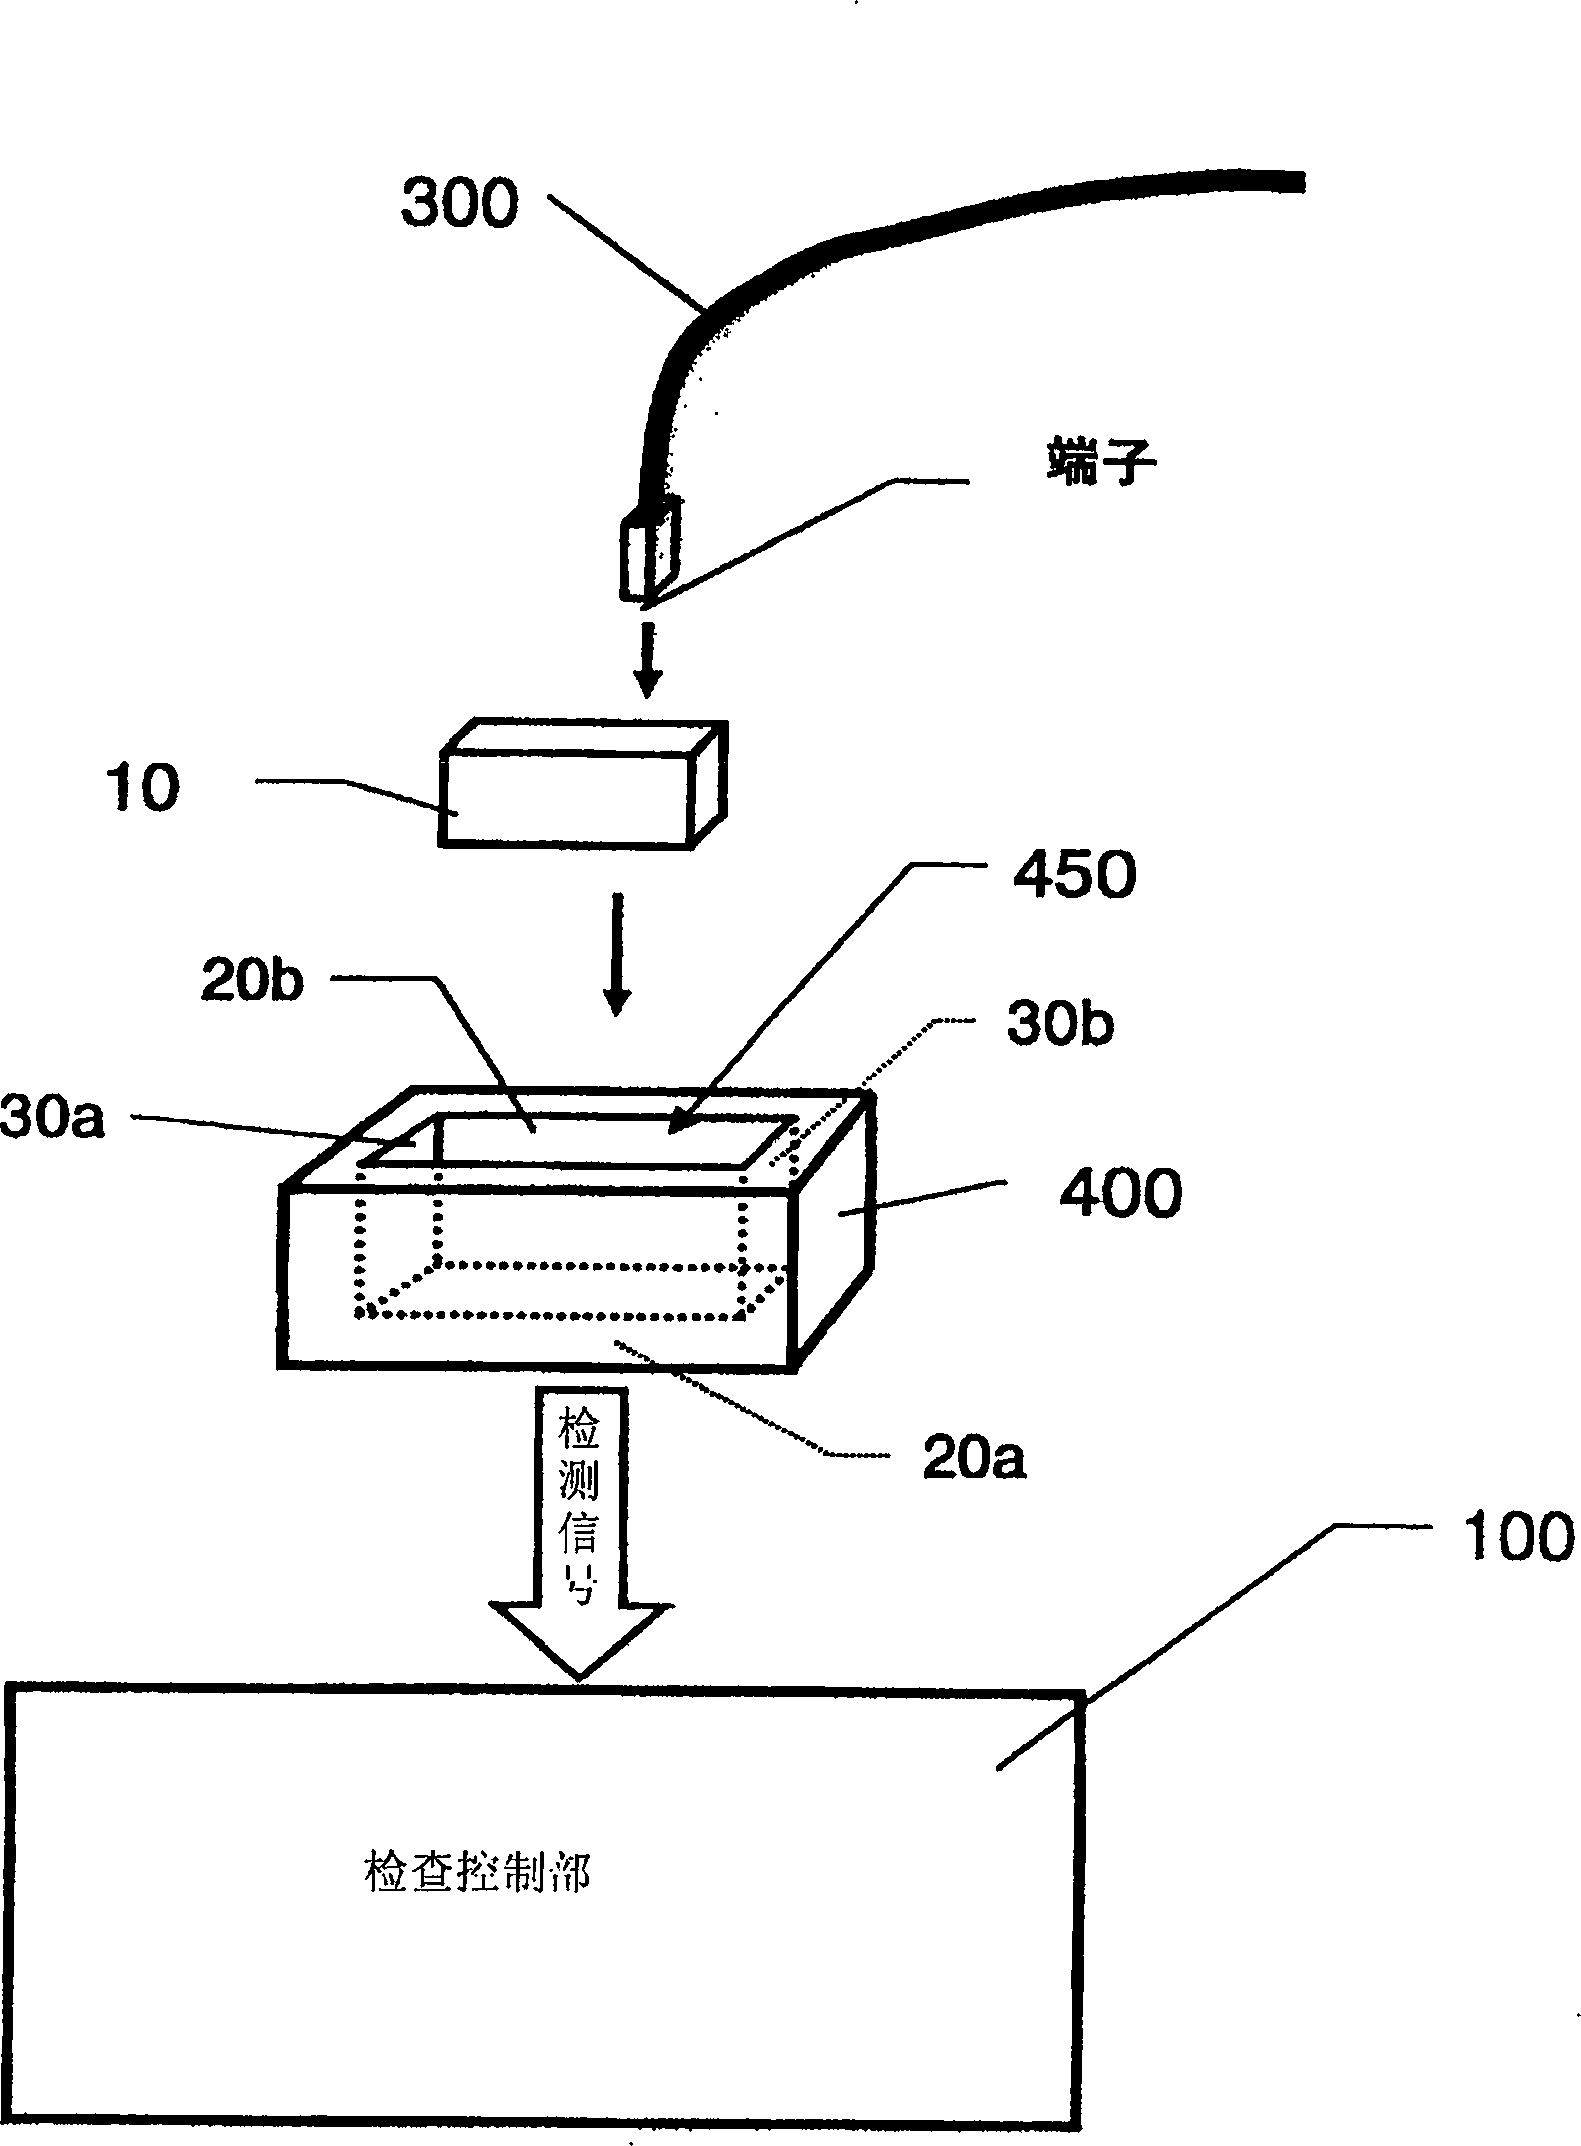 Jig for installation inspection